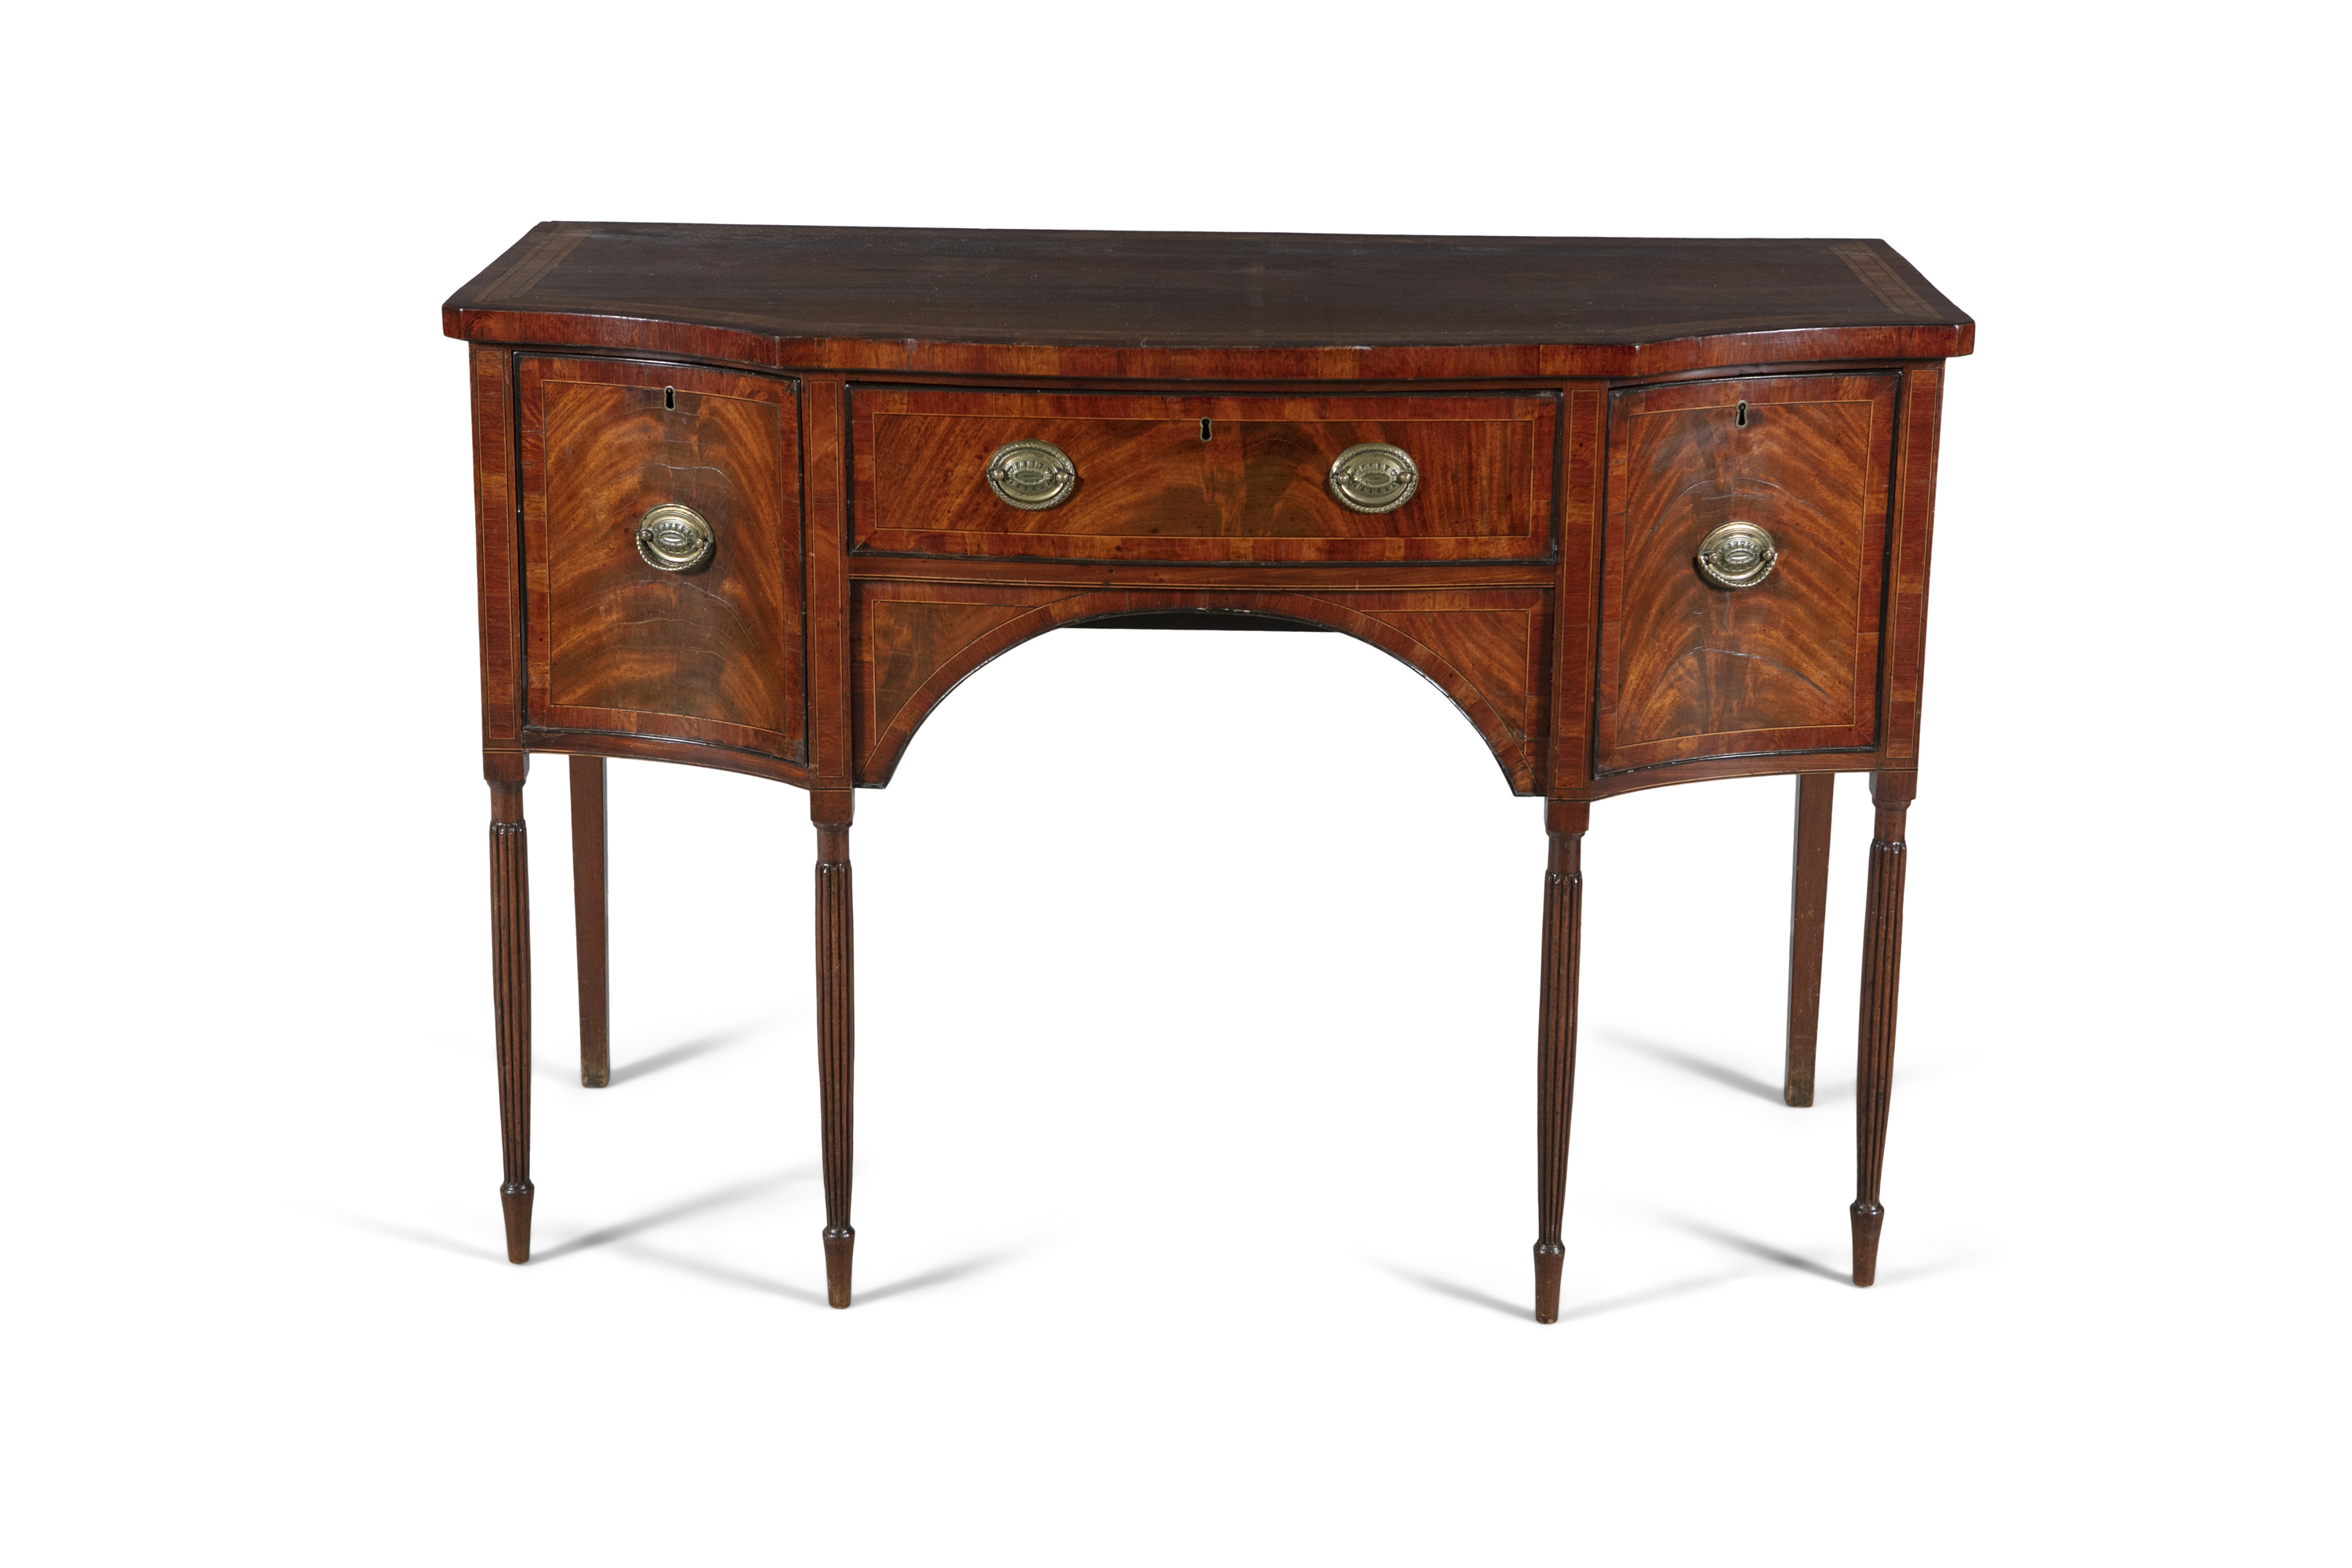 A GEORGE III MAHOGANY CROSS BANDED SERPENTINE SIDEBOARD, of compact form, the shaped rectangular top